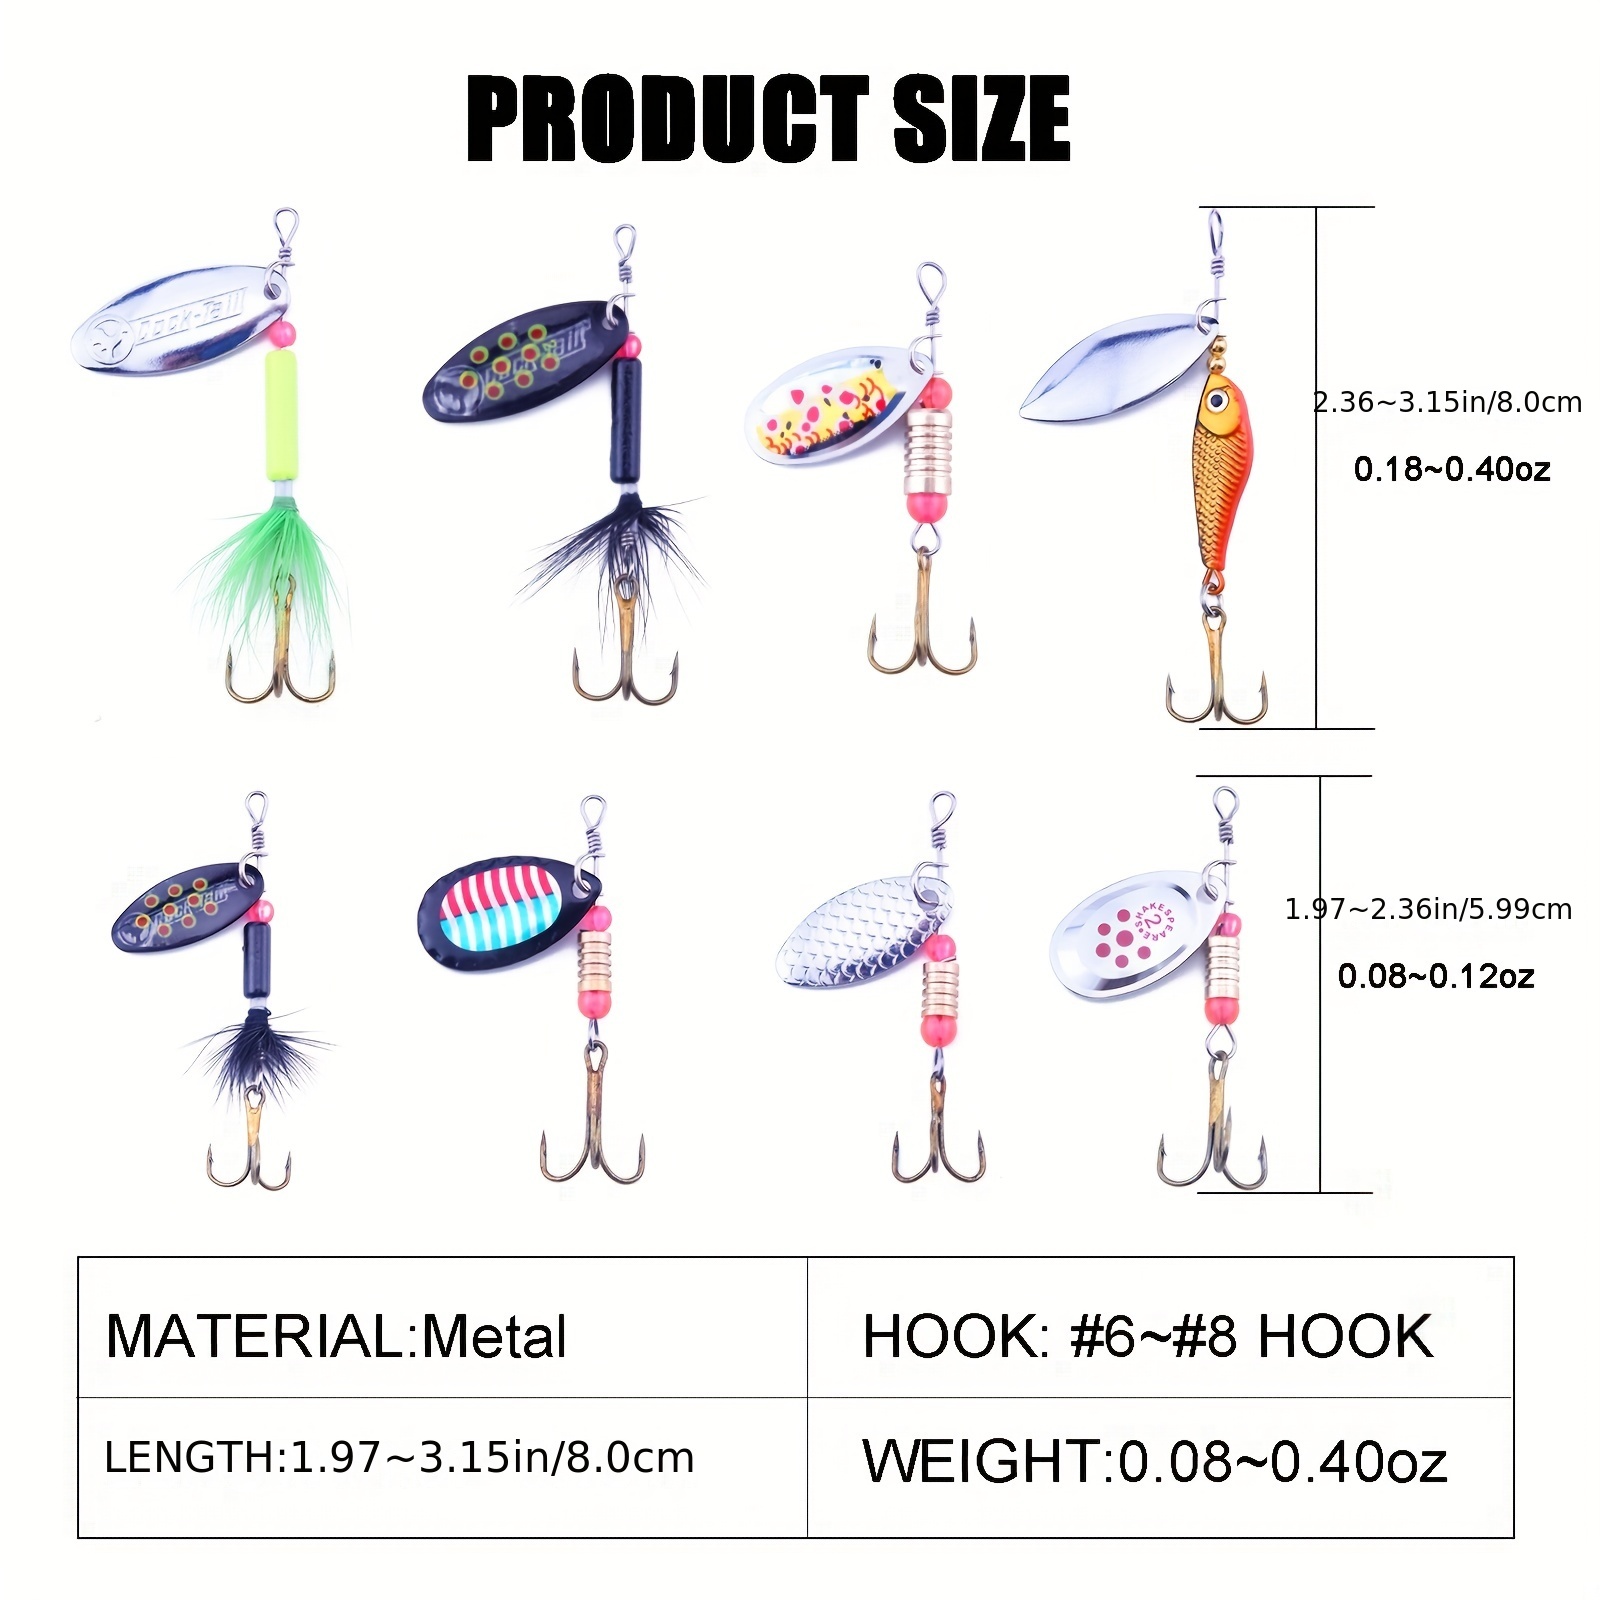  Spinner Baits,Rooster Tail Fishing Lures,Fishing Lures for  Freshwater,Fishing Spoon,16PCS Trout Lures,Bass Lures,Spinners Fishing Lure,Hard  Metal Spinner Baits kit with Carry Bag : Sports & Outdoors